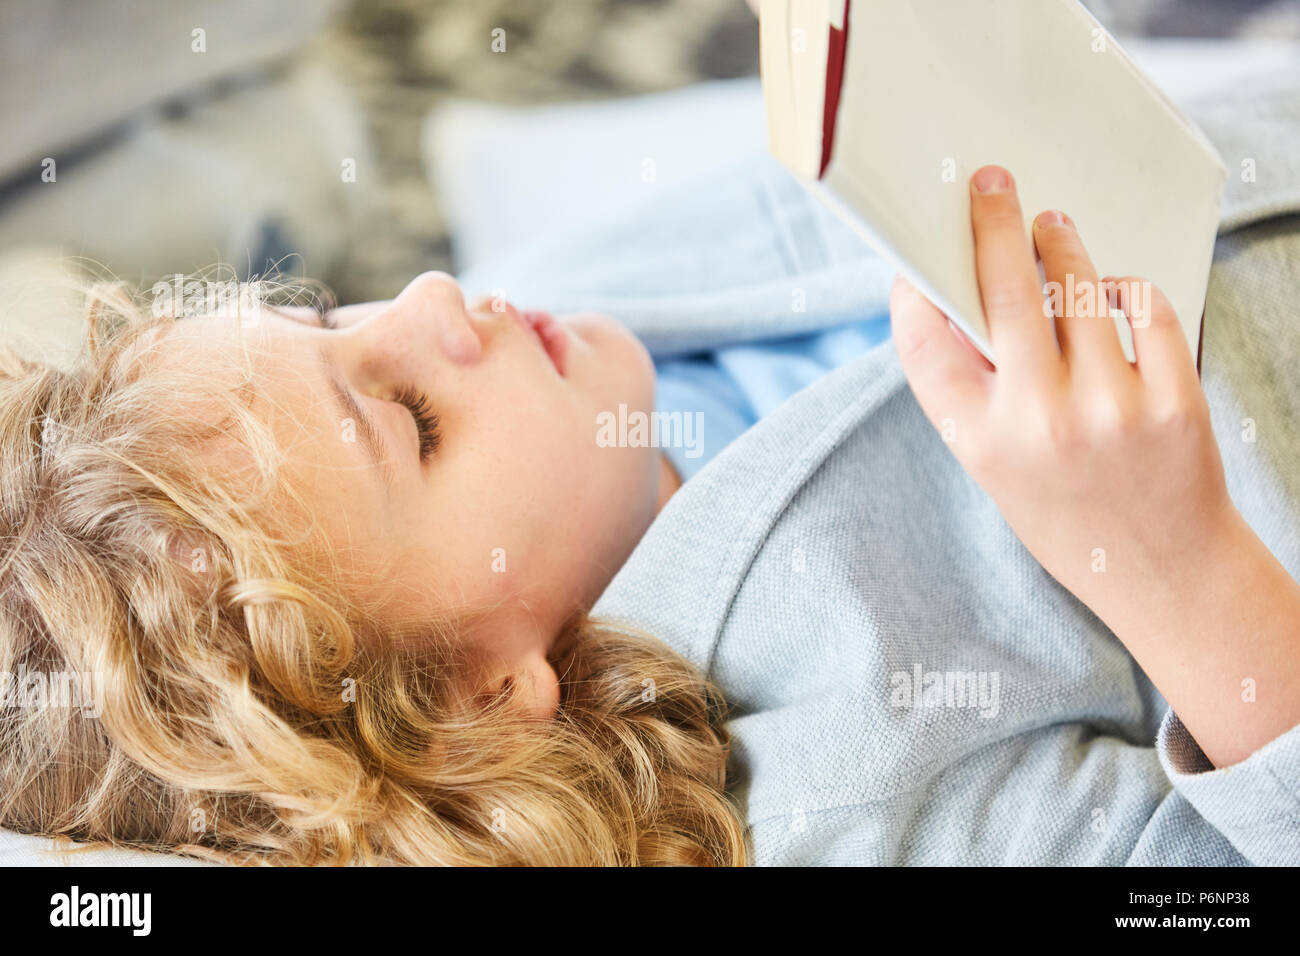 Blond boy reads in a thrilling storybook or non-fiction book Stock Photo